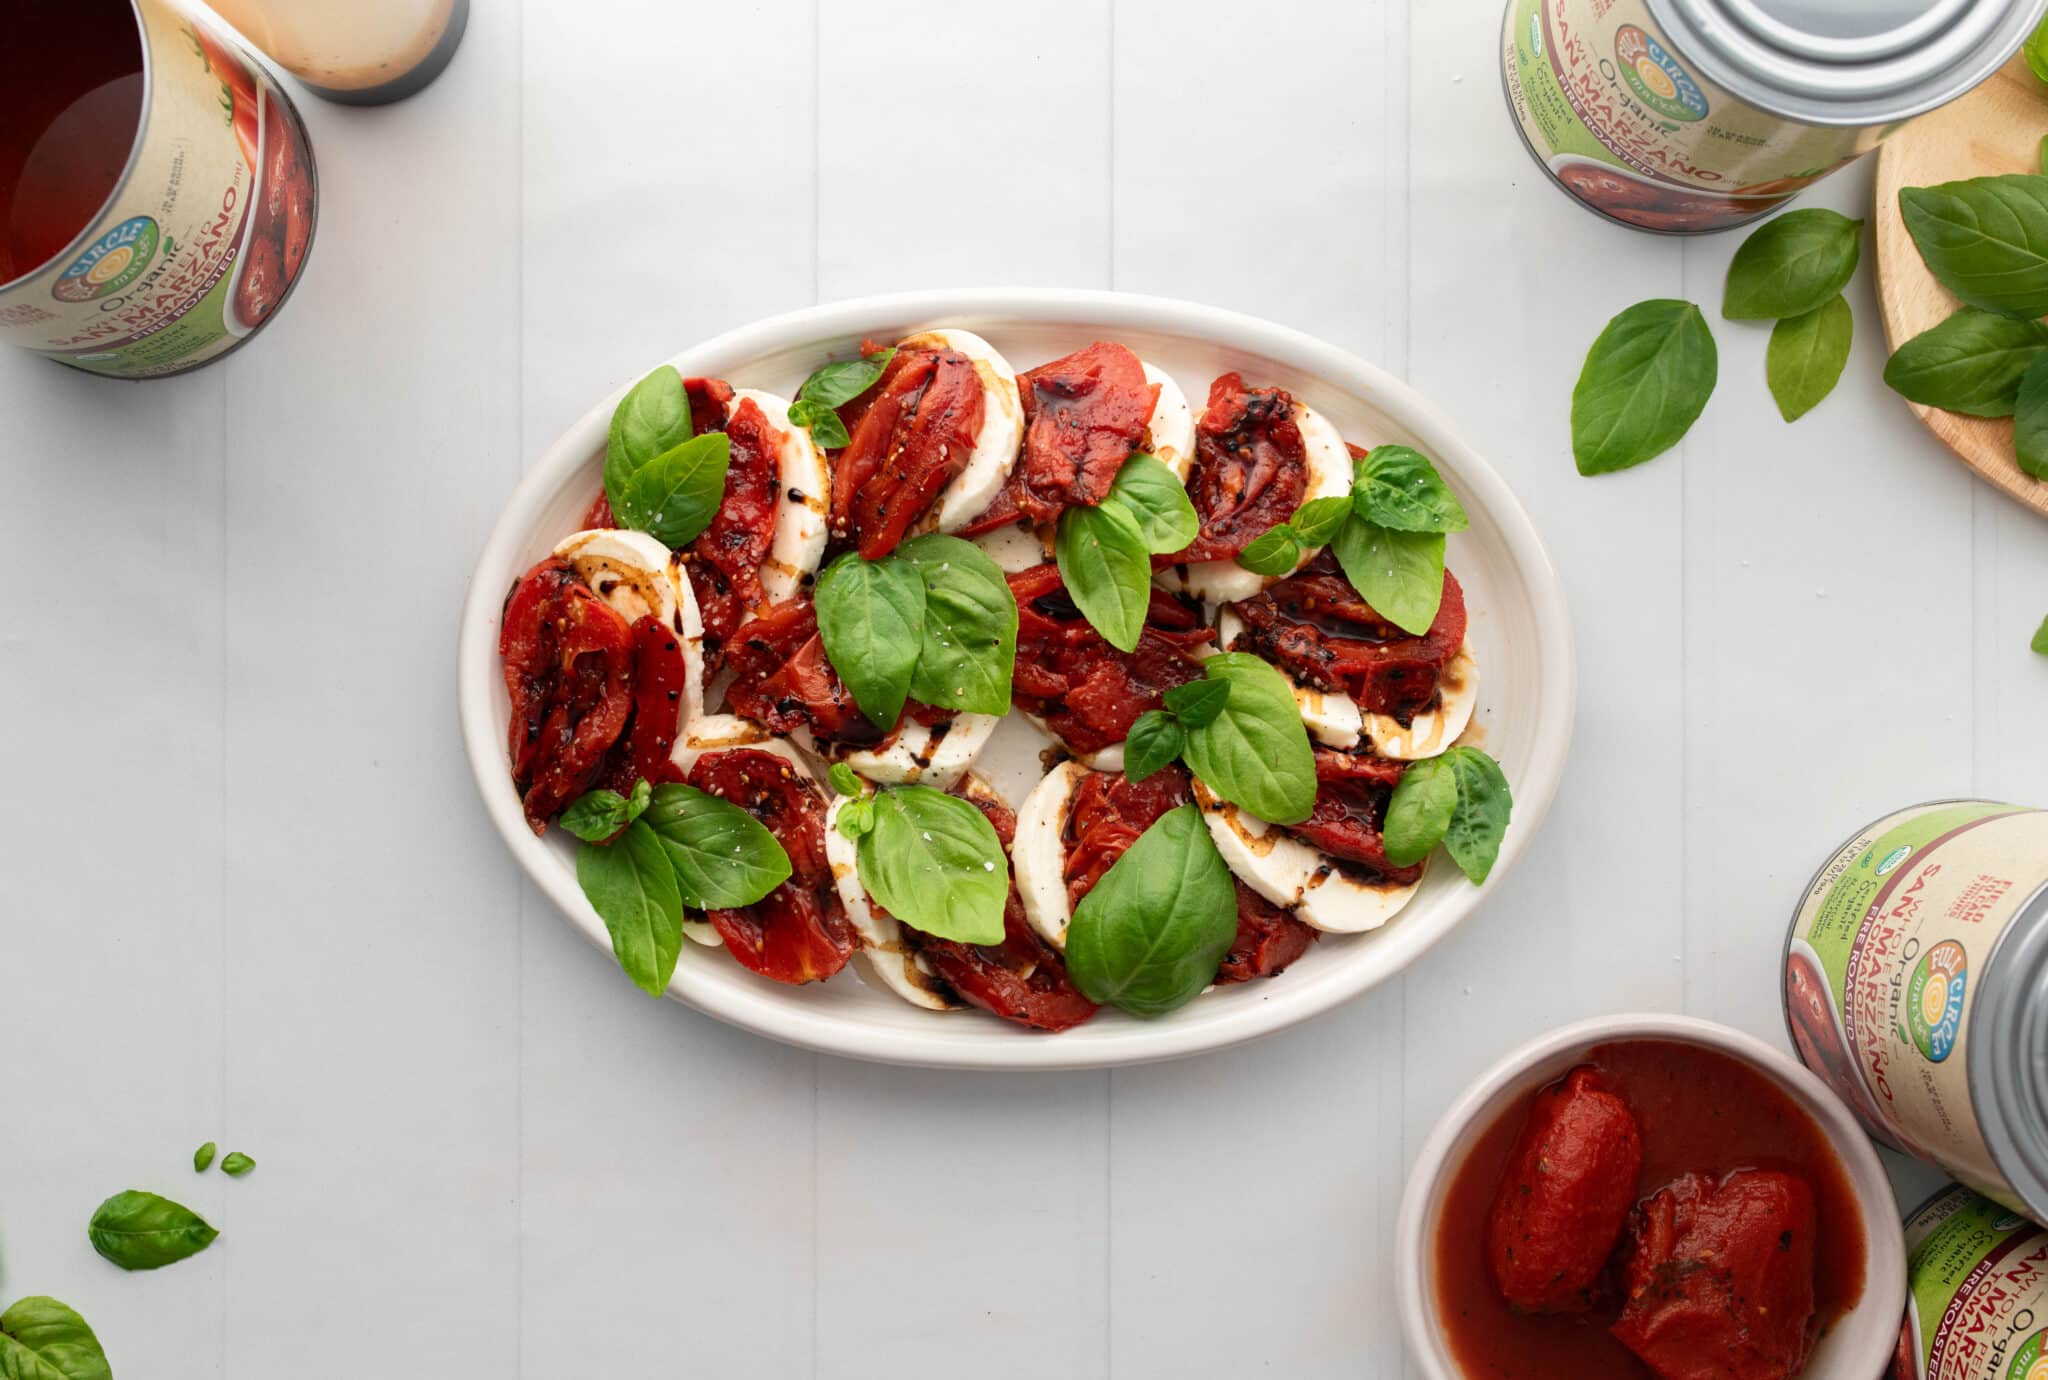 A plate with tomatoes, basil, and a bottle of balsamic vinegar.